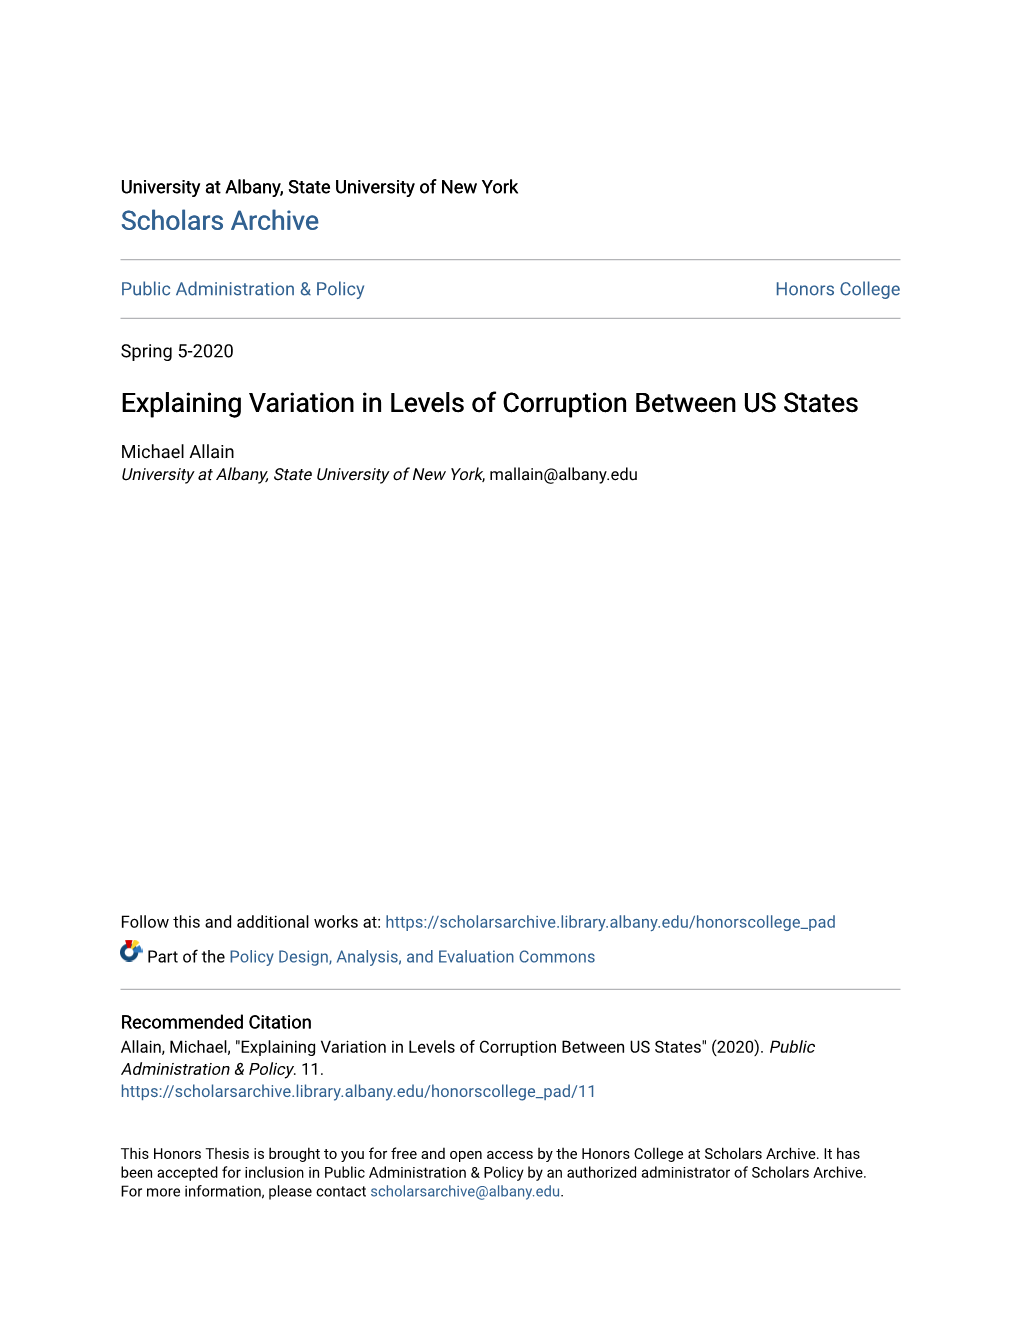 Explaining Variation in Levels of Corruption Between US States